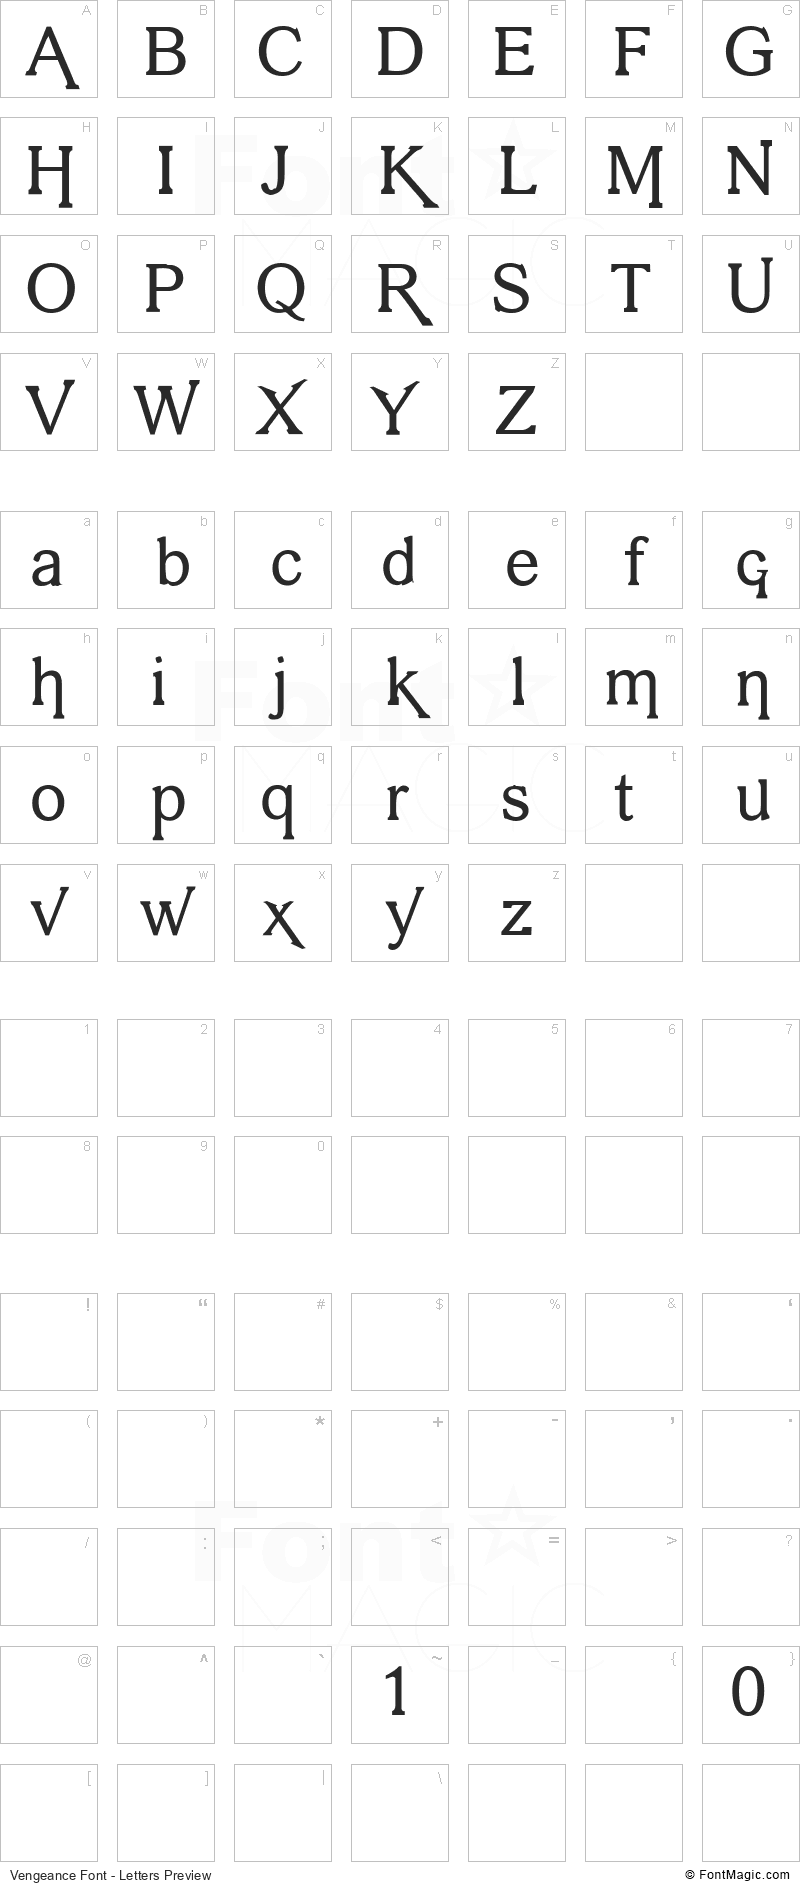 Vengeance Font - All Latters Preview Chart